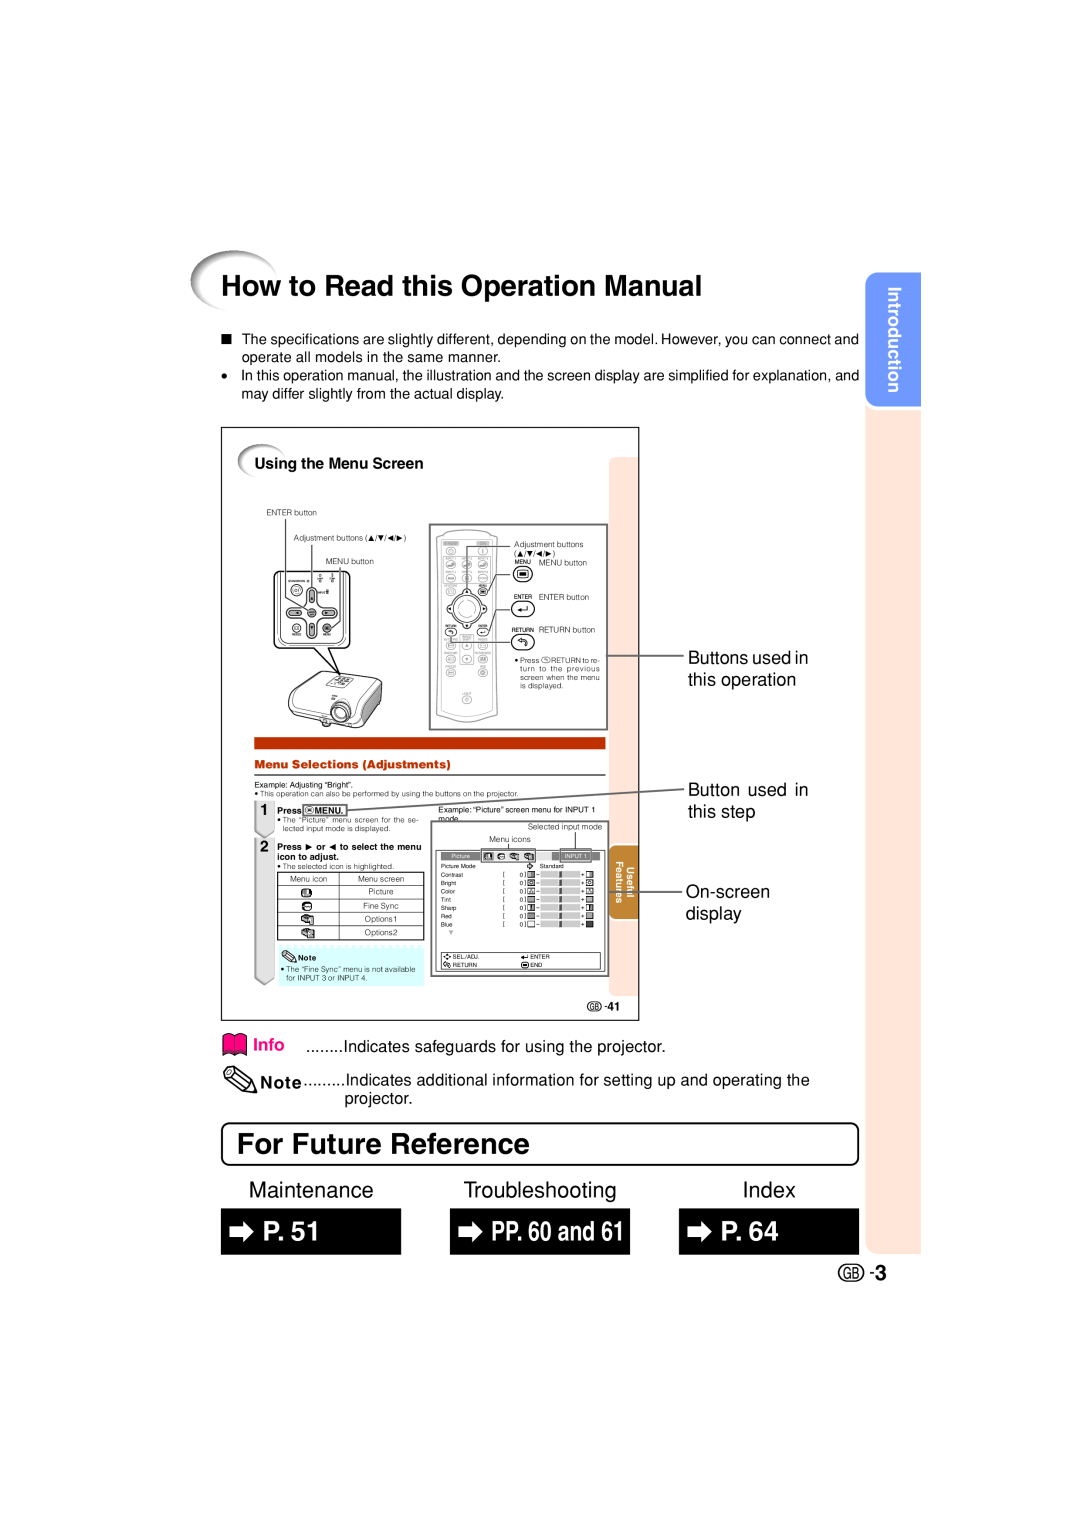 Sharp XV-Z3000 How to Read this Operation Manual, For Future Reference, Maintenance, Troubleshooting, Index, PP. 60 and 